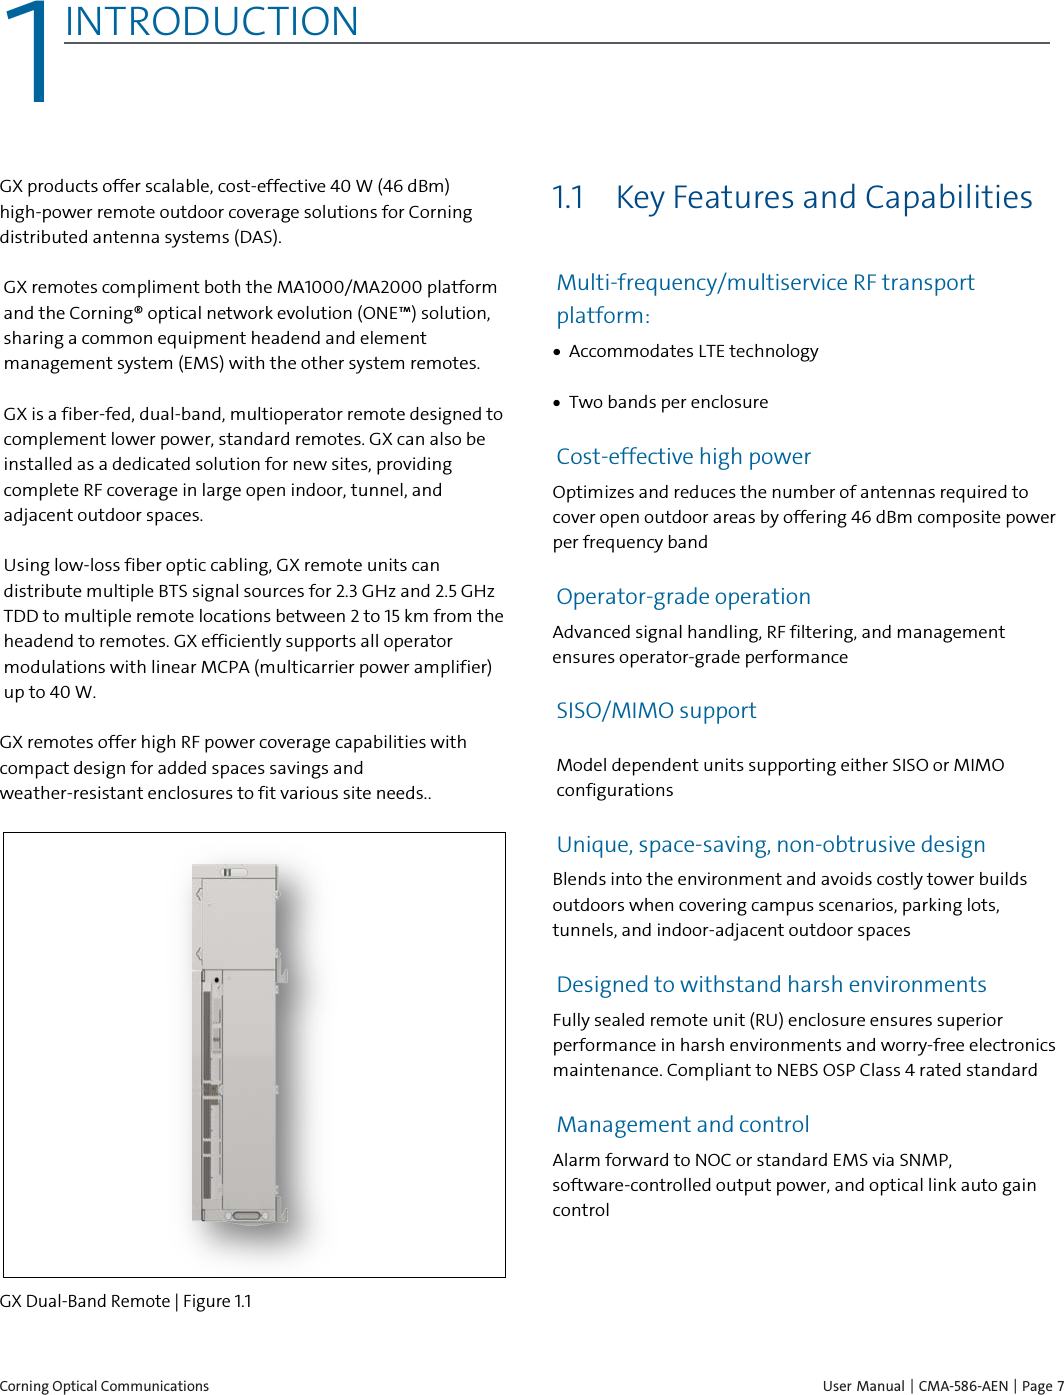  Corning Optical Communications    User Manual | CMA-586-AEN | Page 7 1 1INTRODUCTION    GX products offer scalable, cost-effective 40 W (46 dBm) high-power remote outdoor coverage solutions for Corning distributed antenna systems (DAS).  GX remotes compliment both the MA1000/MA2000 platform and the Corning® optical network evolution (ONE™) solution, sharing a common equipment headend and element management system (EMS) with the other system remotes. GX is a fiber-fed, dual-band, multioperator remote designed to complement lower power, standard remotes. GX can also be installed as a dedicated solution for new sites, providing complete RF coverage in large open indoor, tunnel, and adjacent outdoor spaces.  Using low-loss fiber optic cabling, GX remote units can distribute multiple BTS signal sources for 2.3 GHz and 2.5 GHz TDD to multiple remote locations between 2 to 15 km from the headend to remotes. GX efficiently supports all operator modulations with linear MCPA (multicarrier power amplifier) up to 40 W.  GX remotes offer high RF power coverage capabilities with compact design for added spaces savings and weather-resistant enclosures to fit various site needs..   GX Dual-Band Remote | Figure  1.1  1.1 Key Features and Capabilities  Multi-frequency/multiservice RF transport platform:  • Accommodates LTE technology • Two bands per enclosure Cost-effective high power Optimizes and reduces the number of antennas required to cover open outdoor areas by offering 46 dBm composite power per frequency band Operator-grade operation Advanced signal handling, RF filtering, and management ensures operator-grade performance SISO/MIMO support Model dependent units supporting either SISO or MIMO configurations Unique, space-saving, non-obtrusive design Blends into the environment and avoids costly tower builds outdoors when covering campus scenarios, parking lots, tunnels, and indoor-adjacent outdoor spaces Designed to withstand harsh environments Fully sealed remote unit (RU) enclosure ensures superior performance in harsh environments and worry-free electronics maintenance. Compliant to NEBS OSP Class 4 rated standard Management and control Alarm forward to NOC or standard EMS via SNMP, software-controlled output power, and optical link auto gain control   